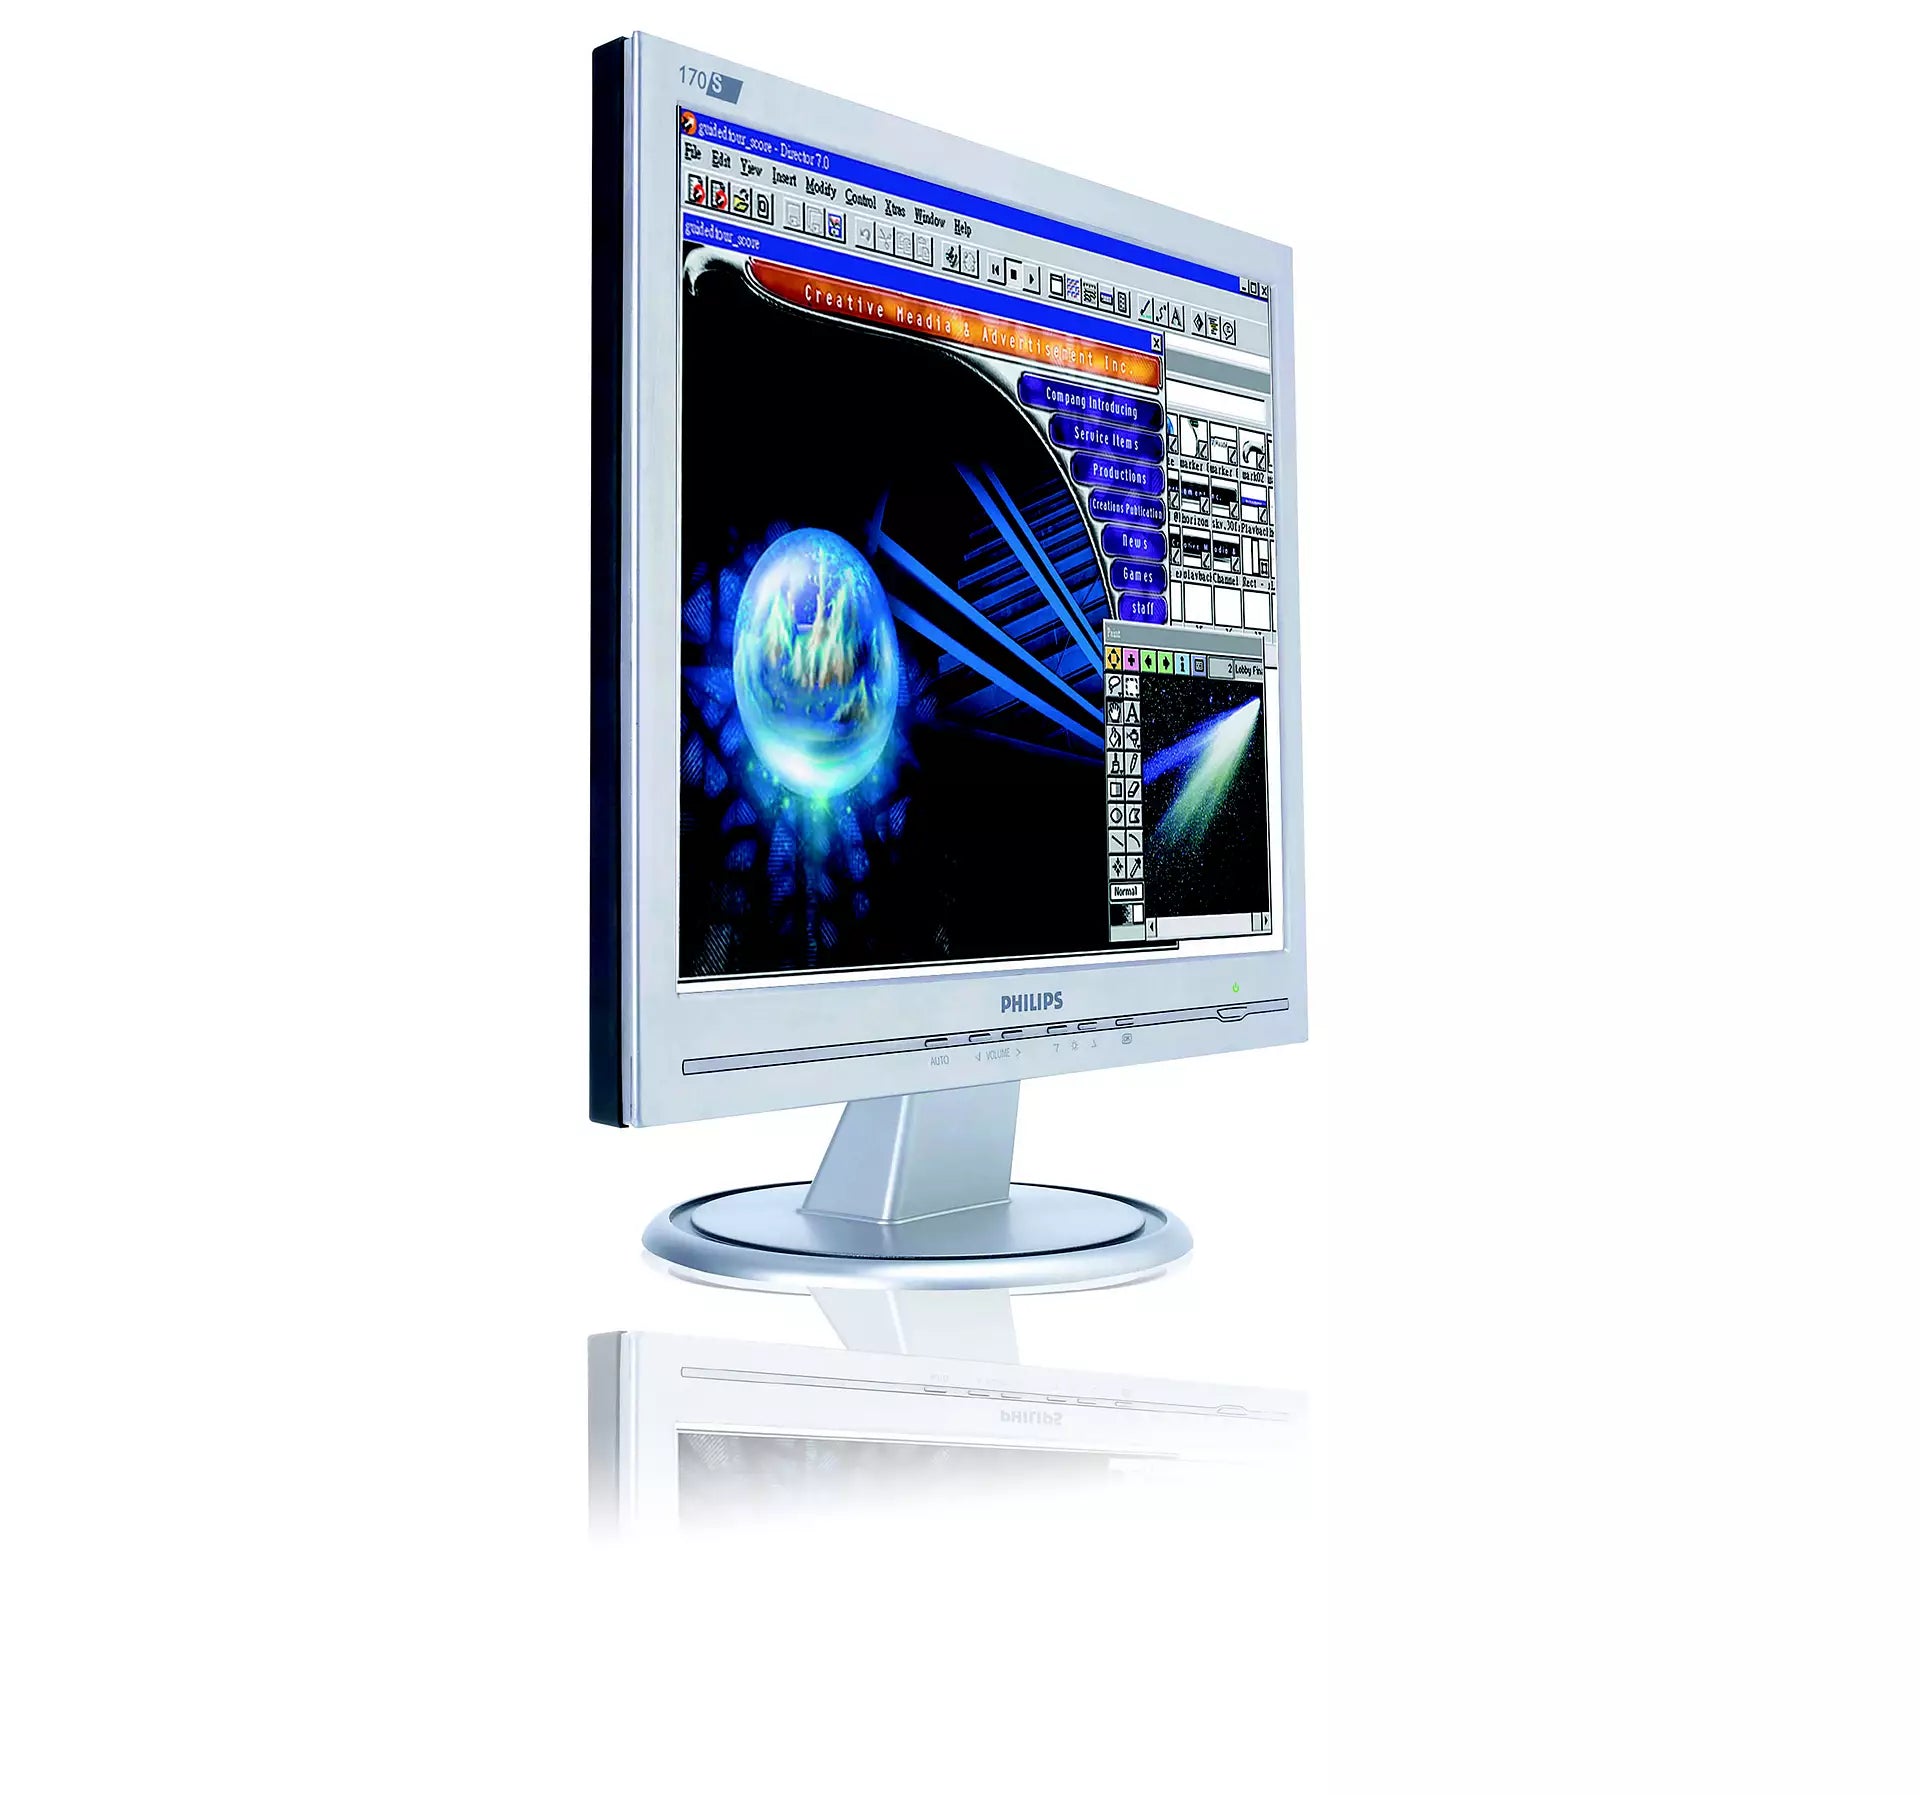 Philips 170A LCD Monitor 17